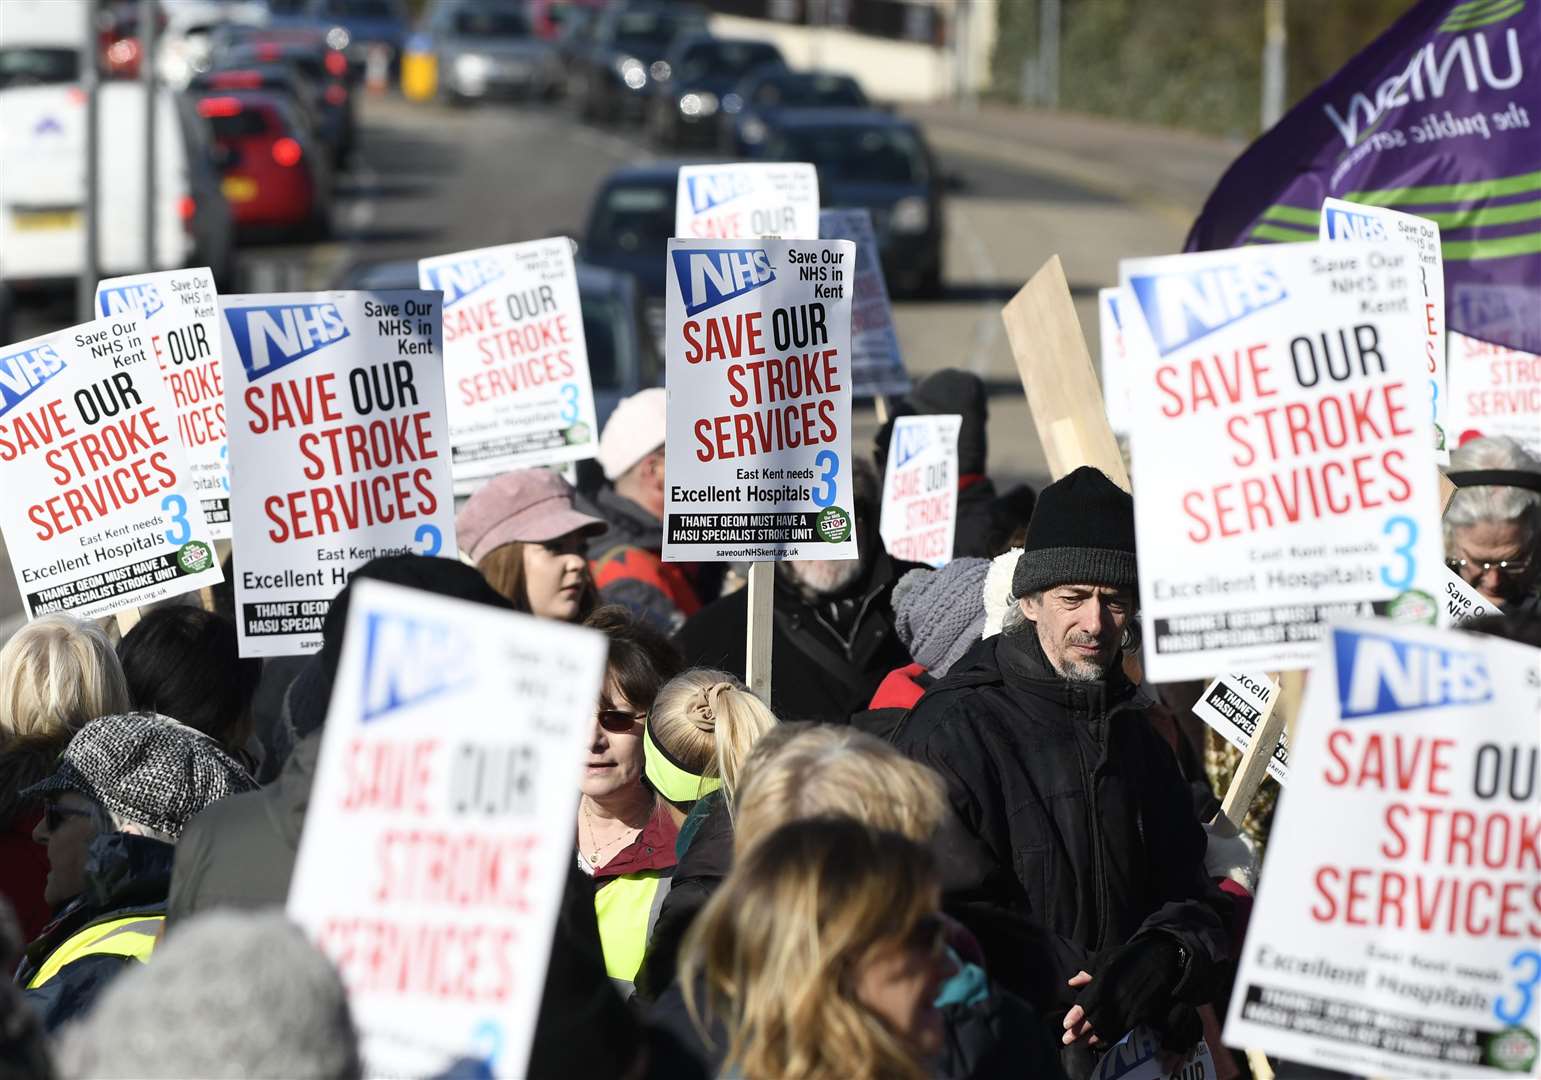 A protest to save QEQM's stroke service outside the hospital